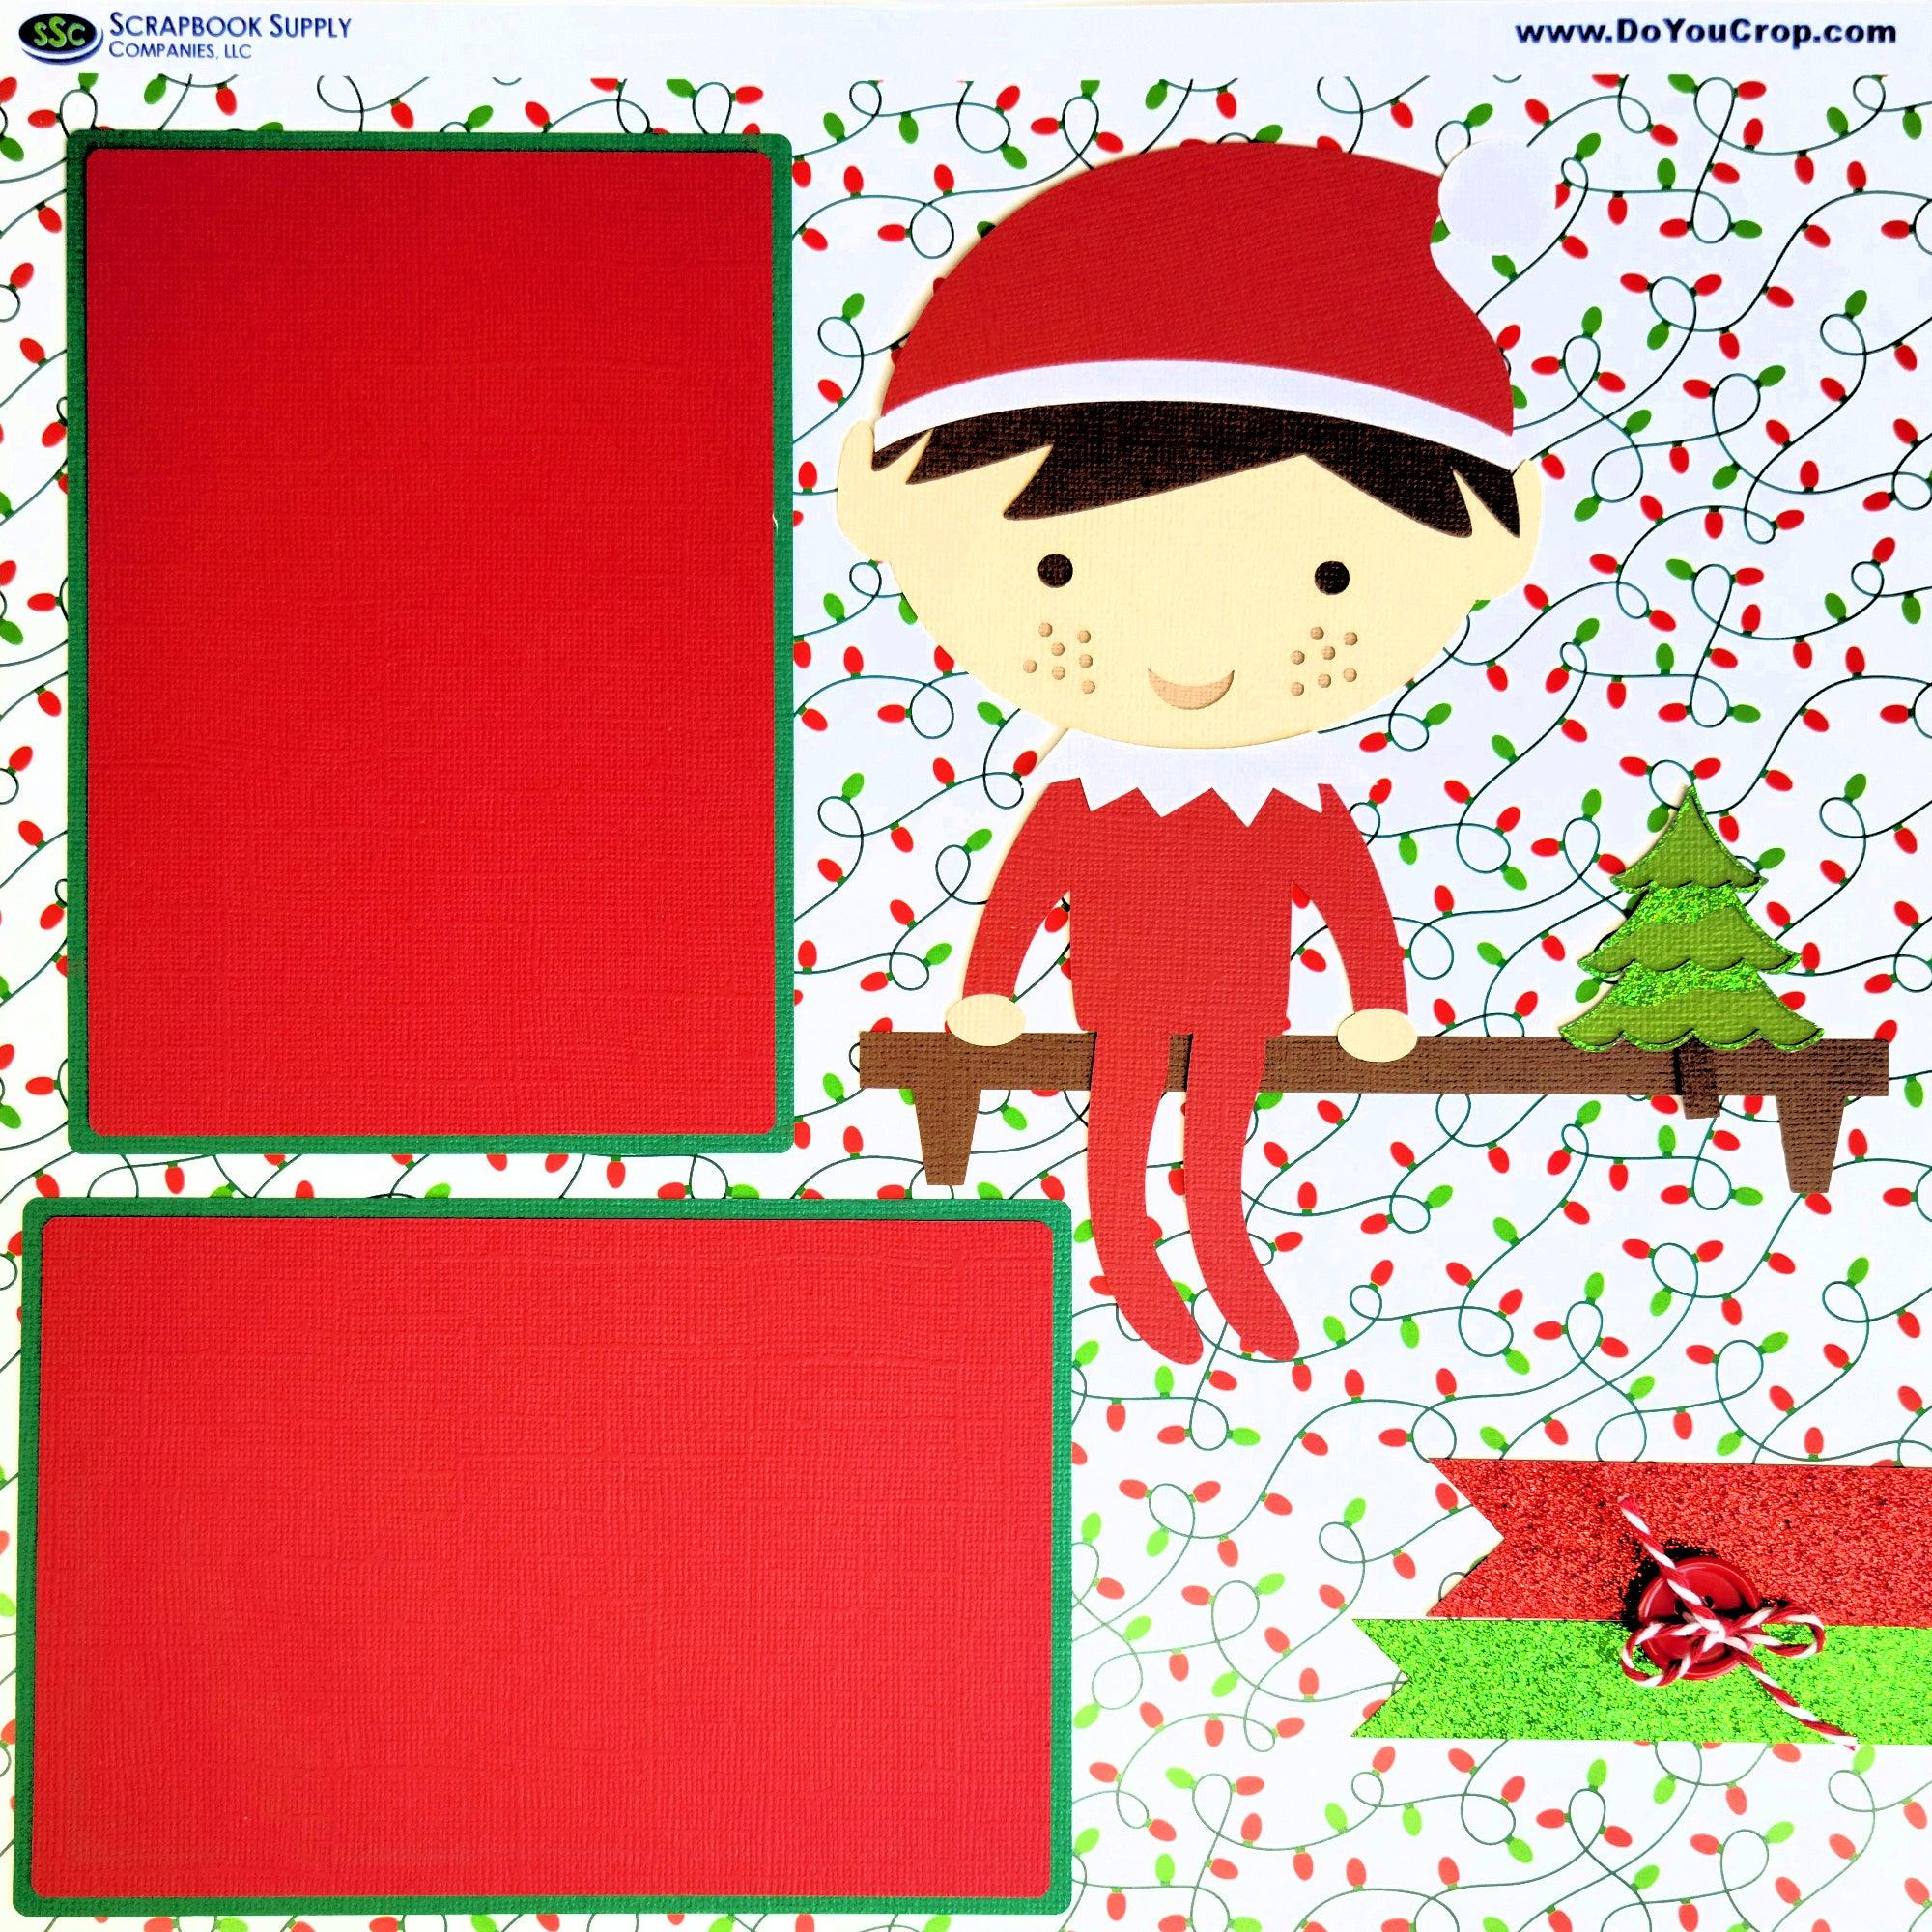 Elf Magic Elf On The Shelf Premade Embellished Two-Page 12 x 12 Scrapbook Premade by SSC Designs - Scrapbook Supply Companies